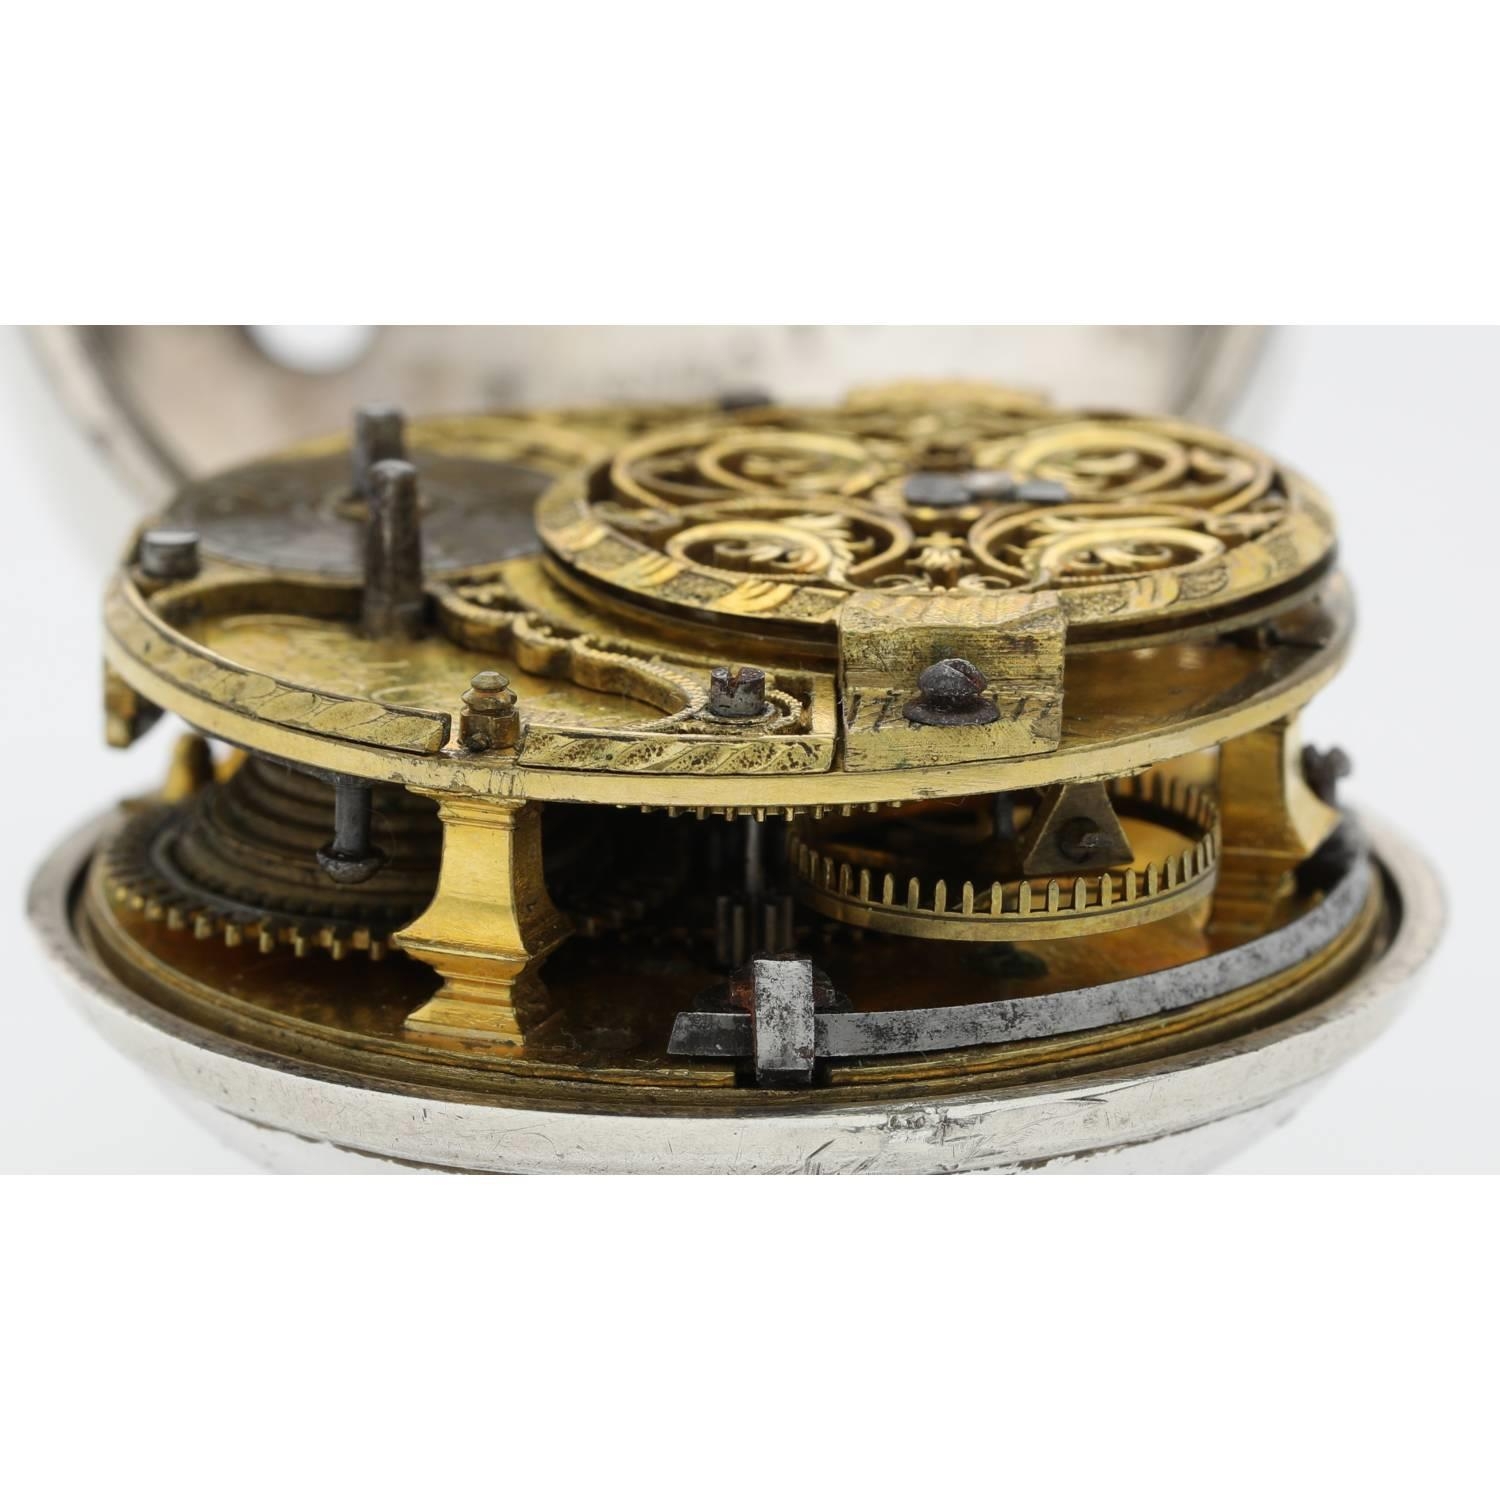 Charles Cabrier, London - 18th century silver pair case verge pocket watch, signed fusee movement, - Image 6 of 11